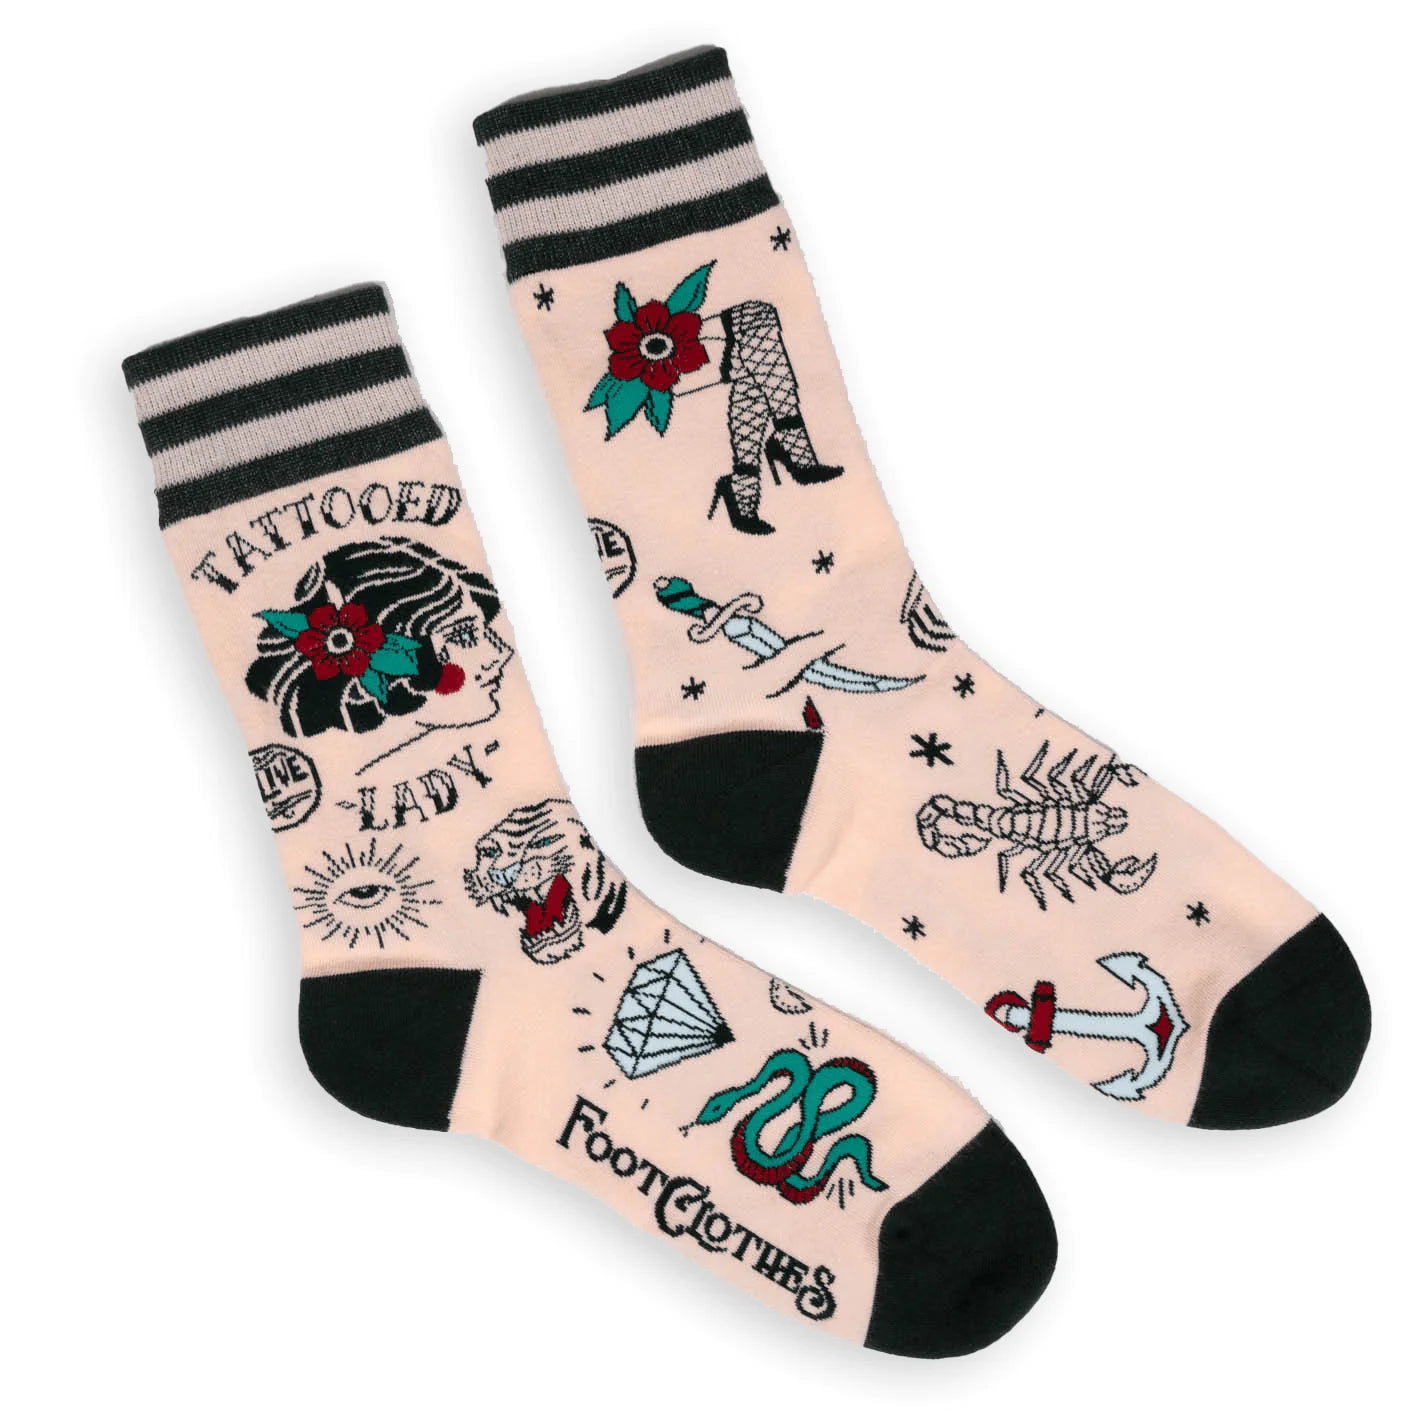 Shown in a flatlay, a pair of unisex crew socks in light pink with a gray heel and toe. These socks feature an all over motif of classic tattoo art with the words 